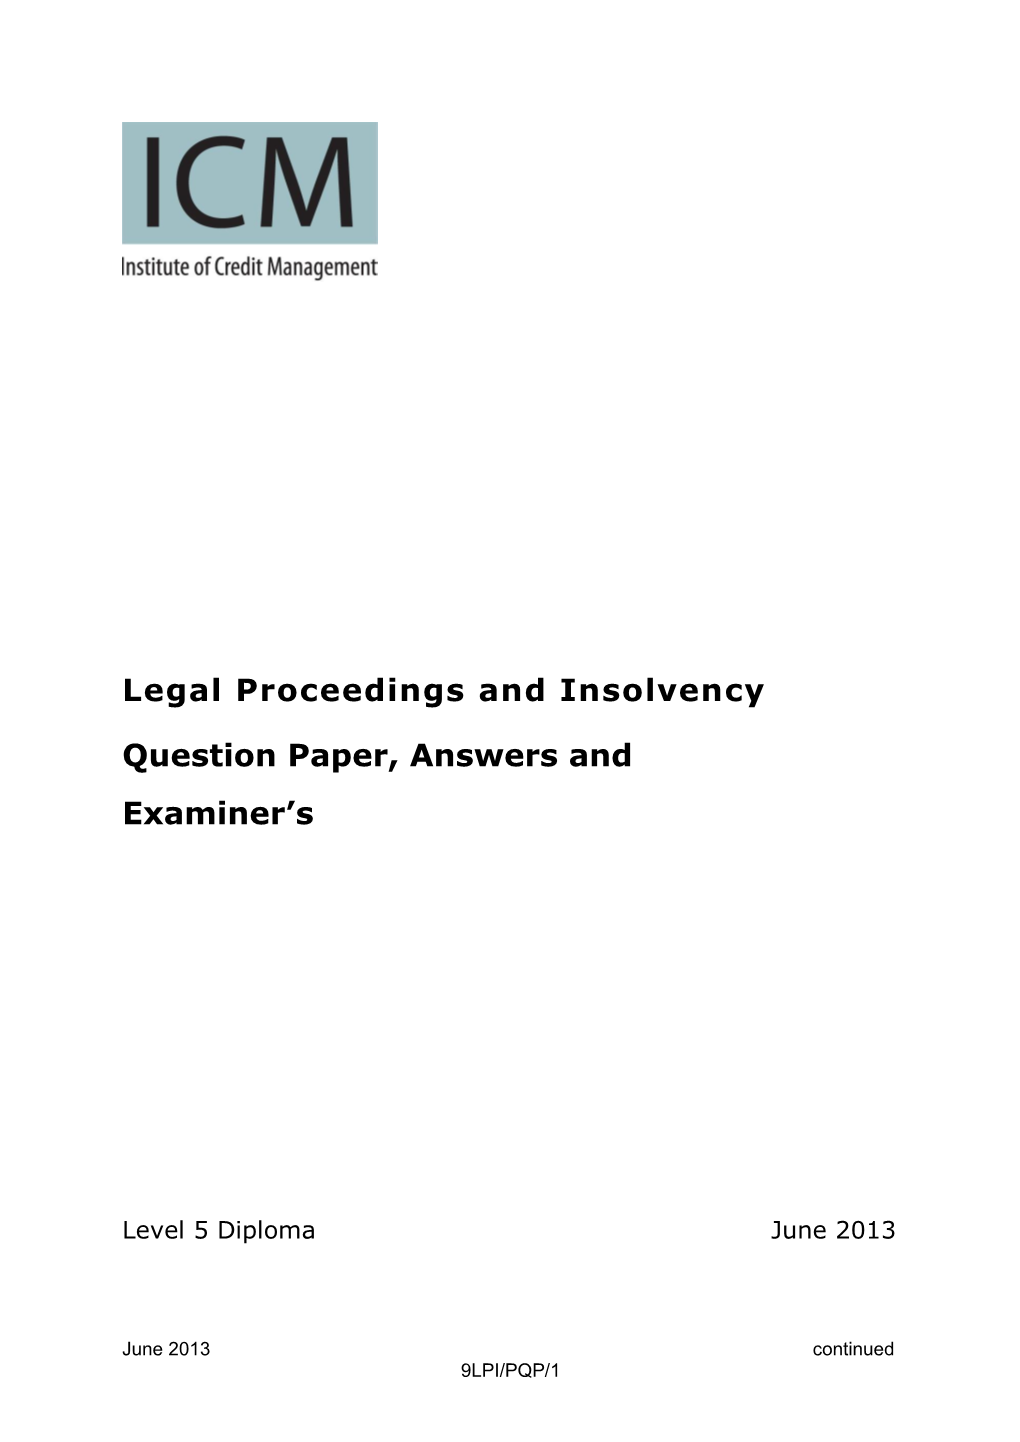 Legal Proceedings and Insolvency Question Paper, Answers And